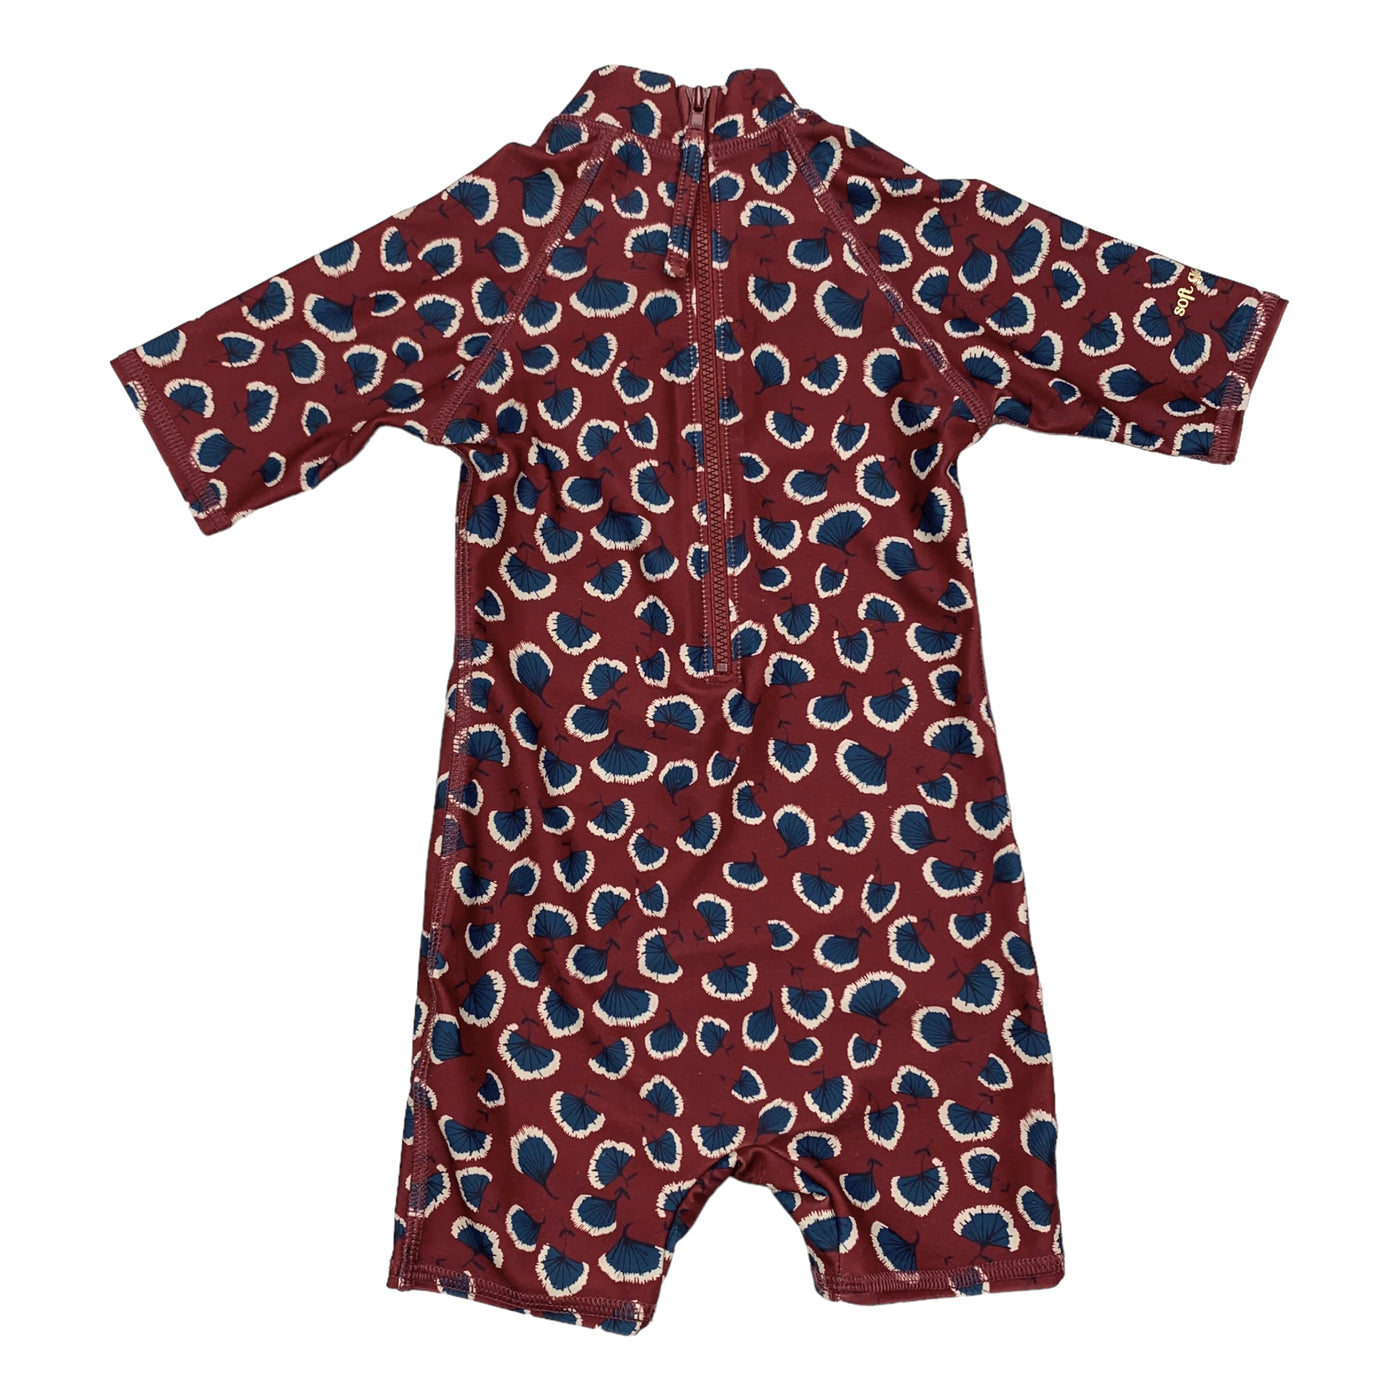 Soft Gallery swimsuit red leaf print size 12m